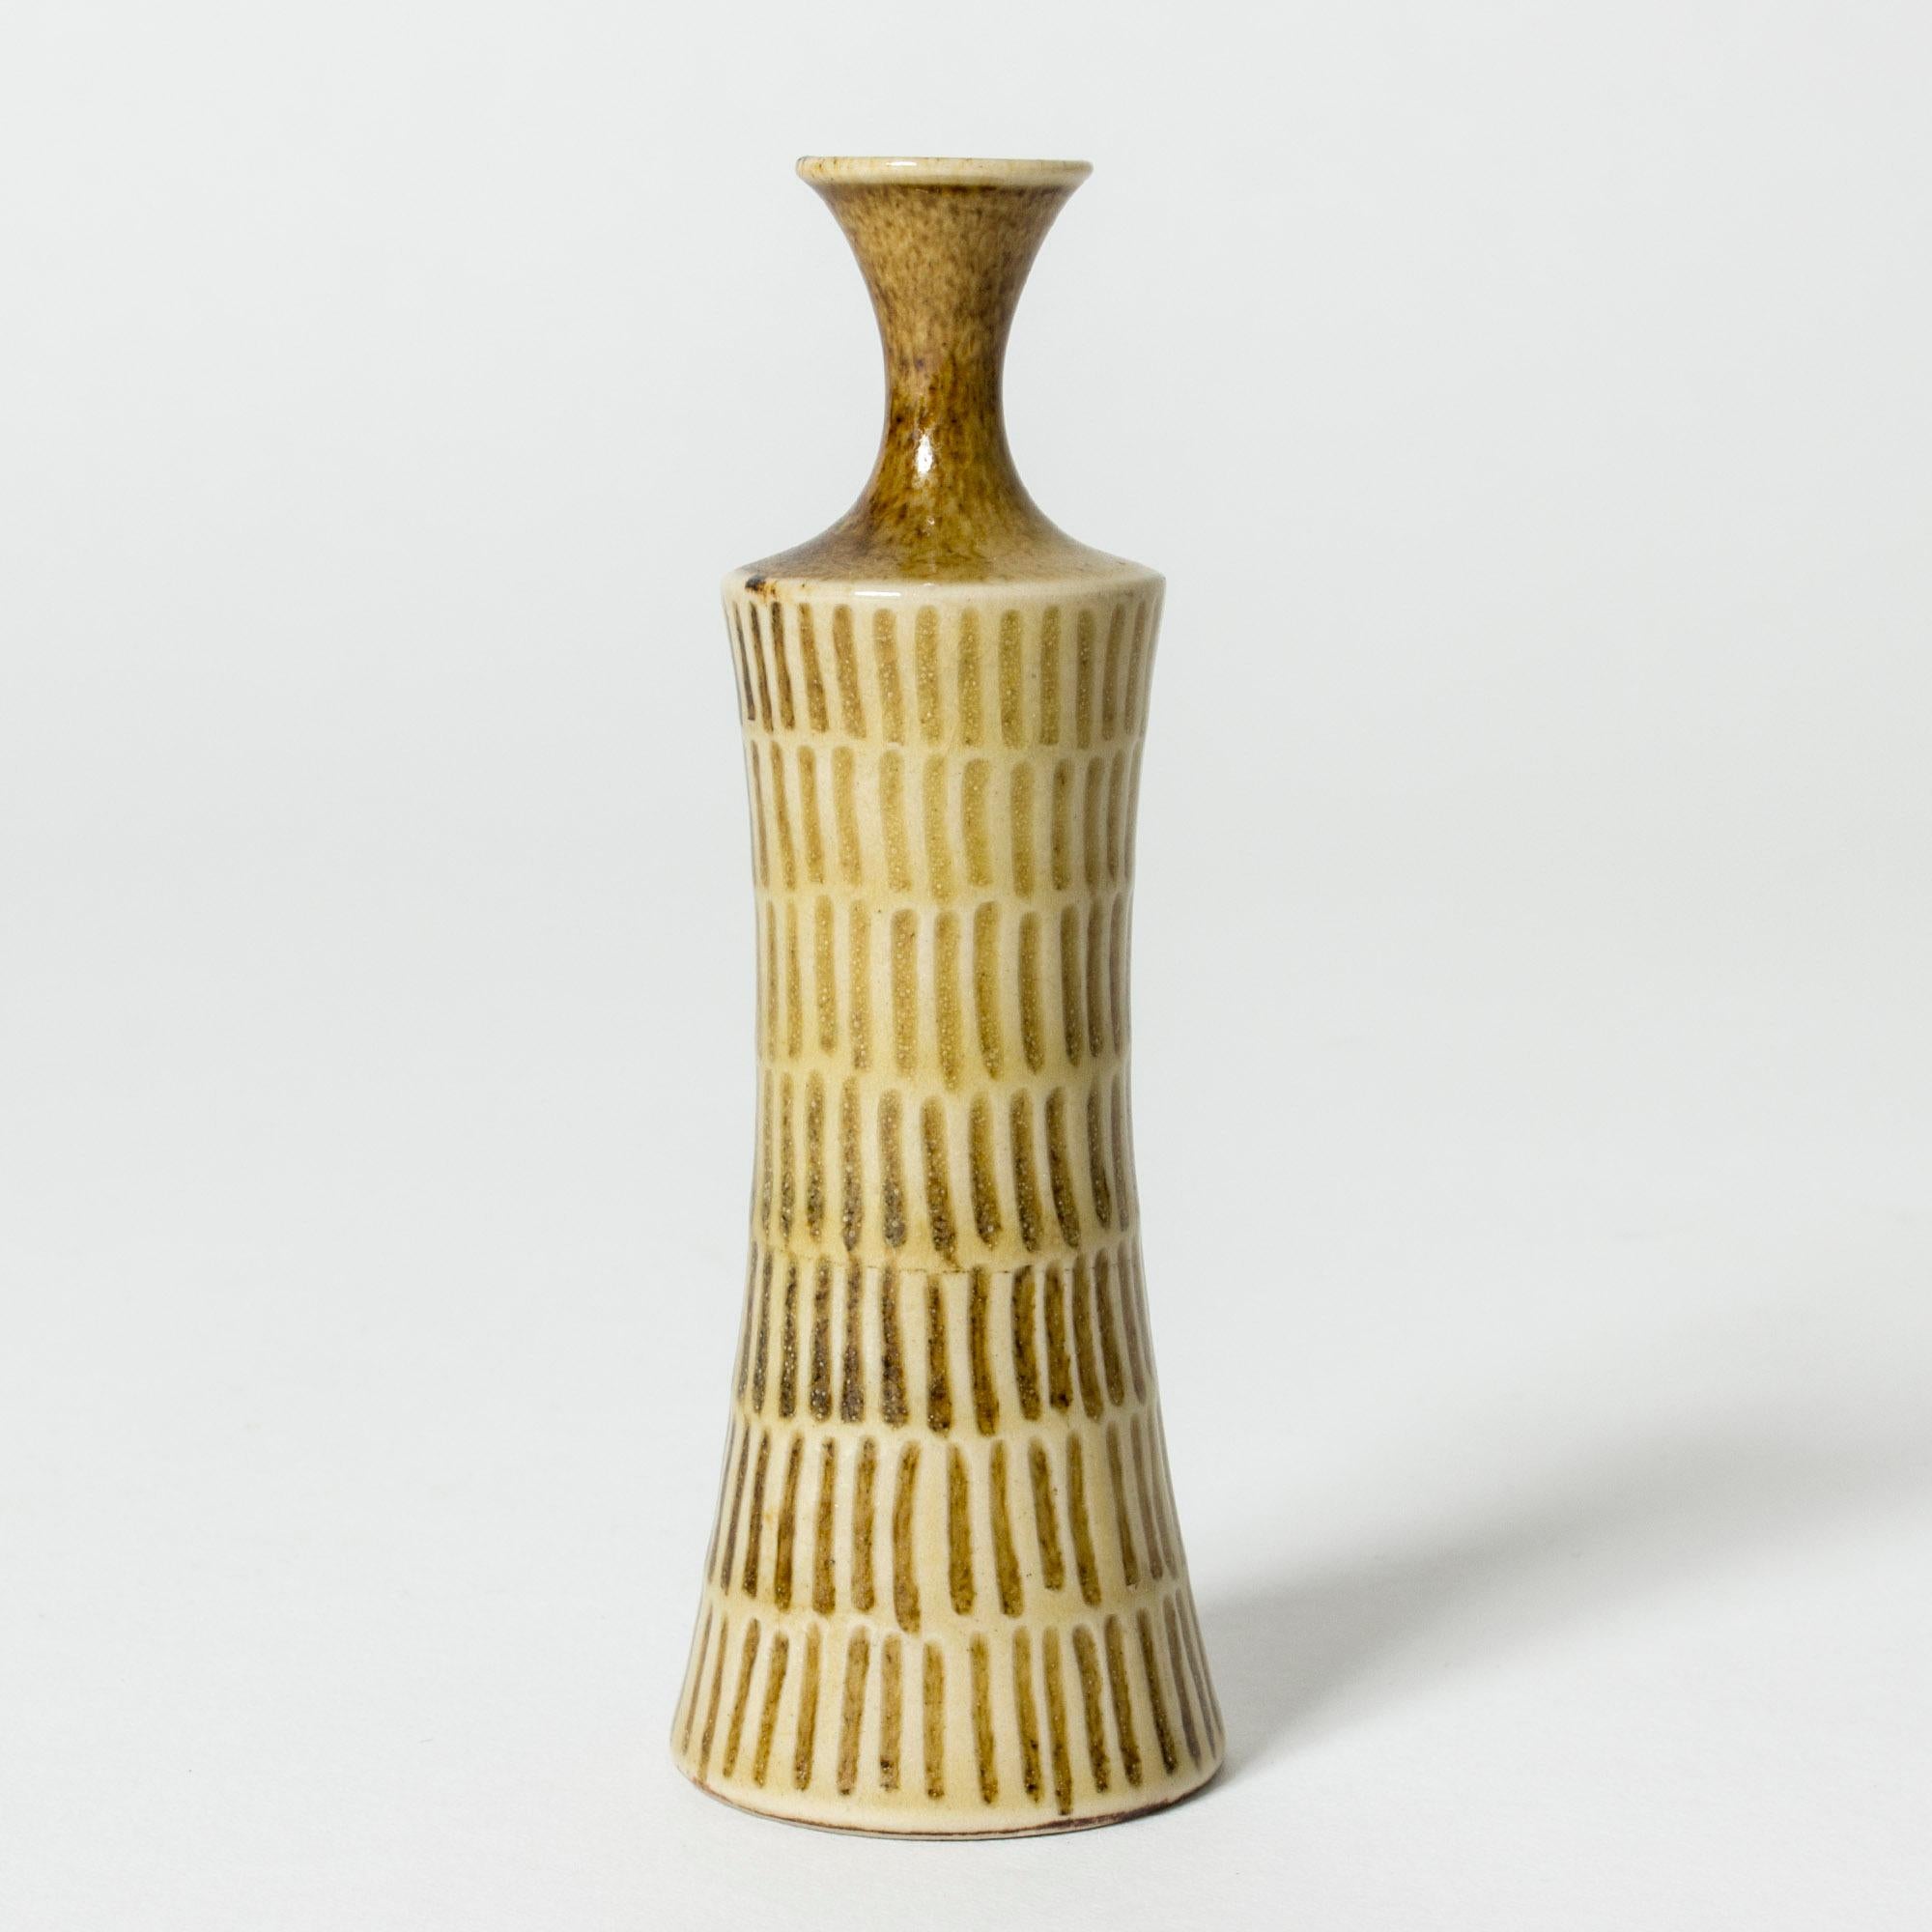 Cool unique miniature vase by Stig Lindberg. Slender stoneware form with a graphic pattern, glazed pale yellow and brown with a glossy surface.